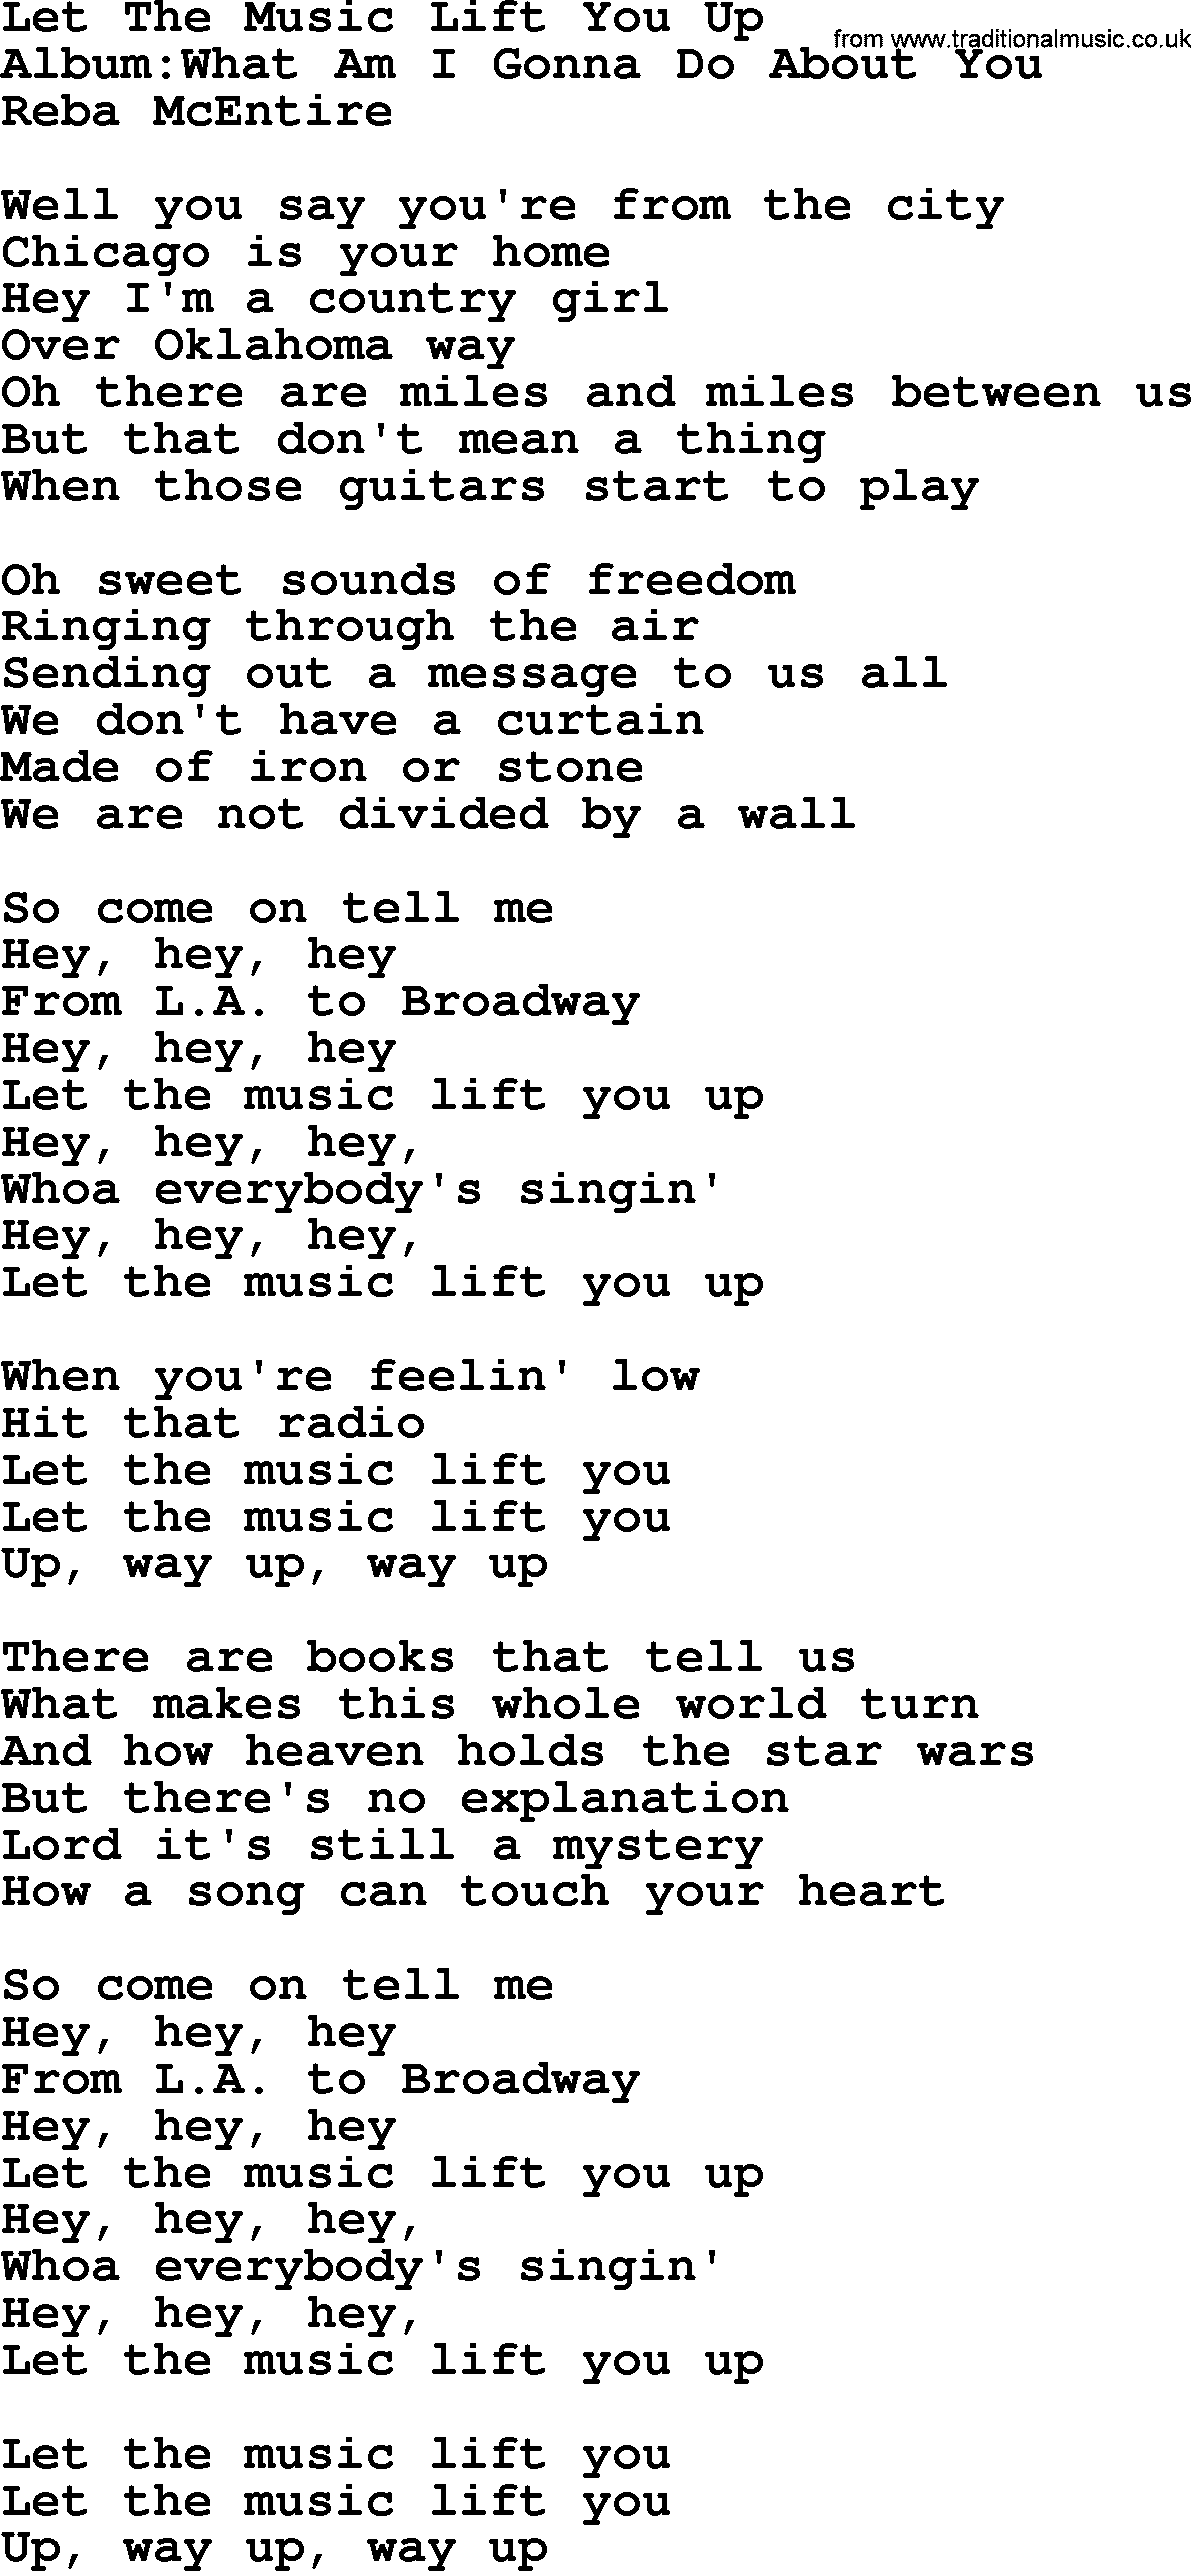 Reba McEntire song: Let The Music Lift You Up lyrics